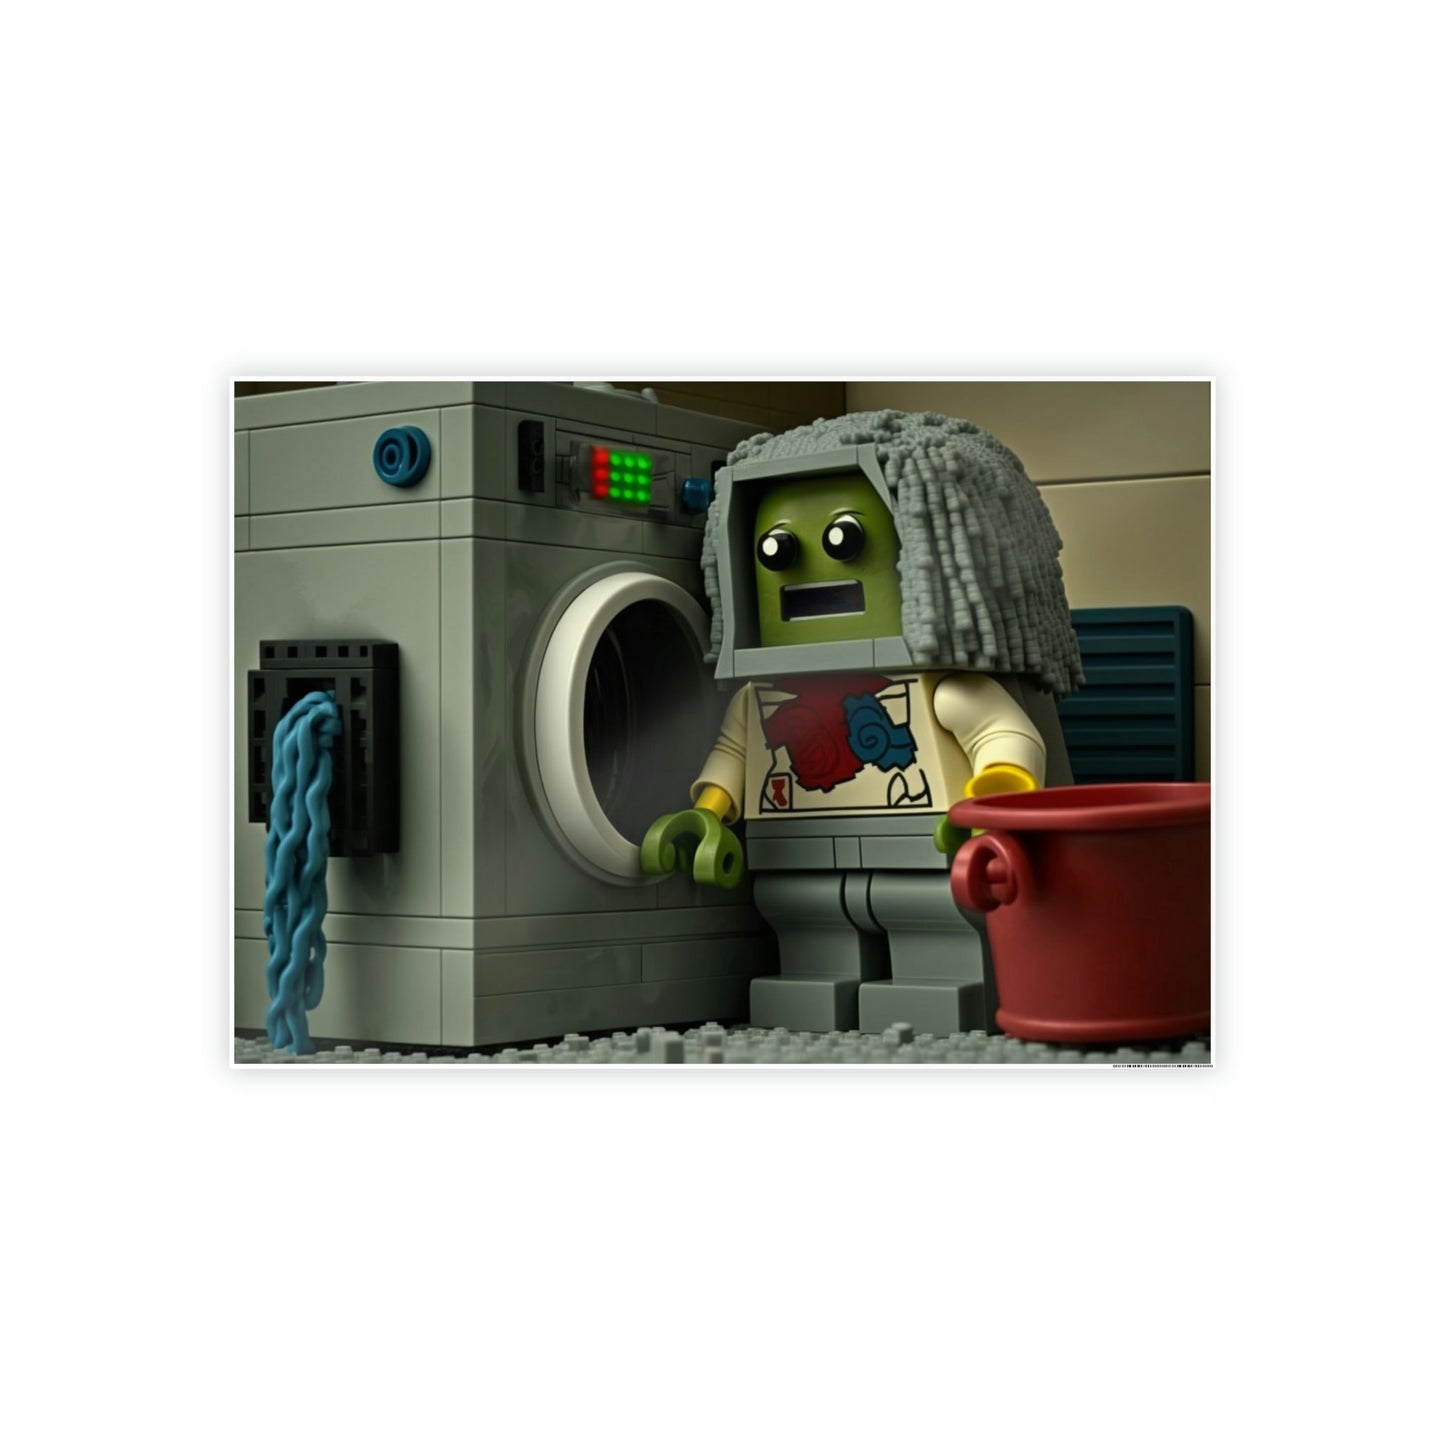 Vibrant Lego Universe: Framed Canvas and Print of Iconic Characters